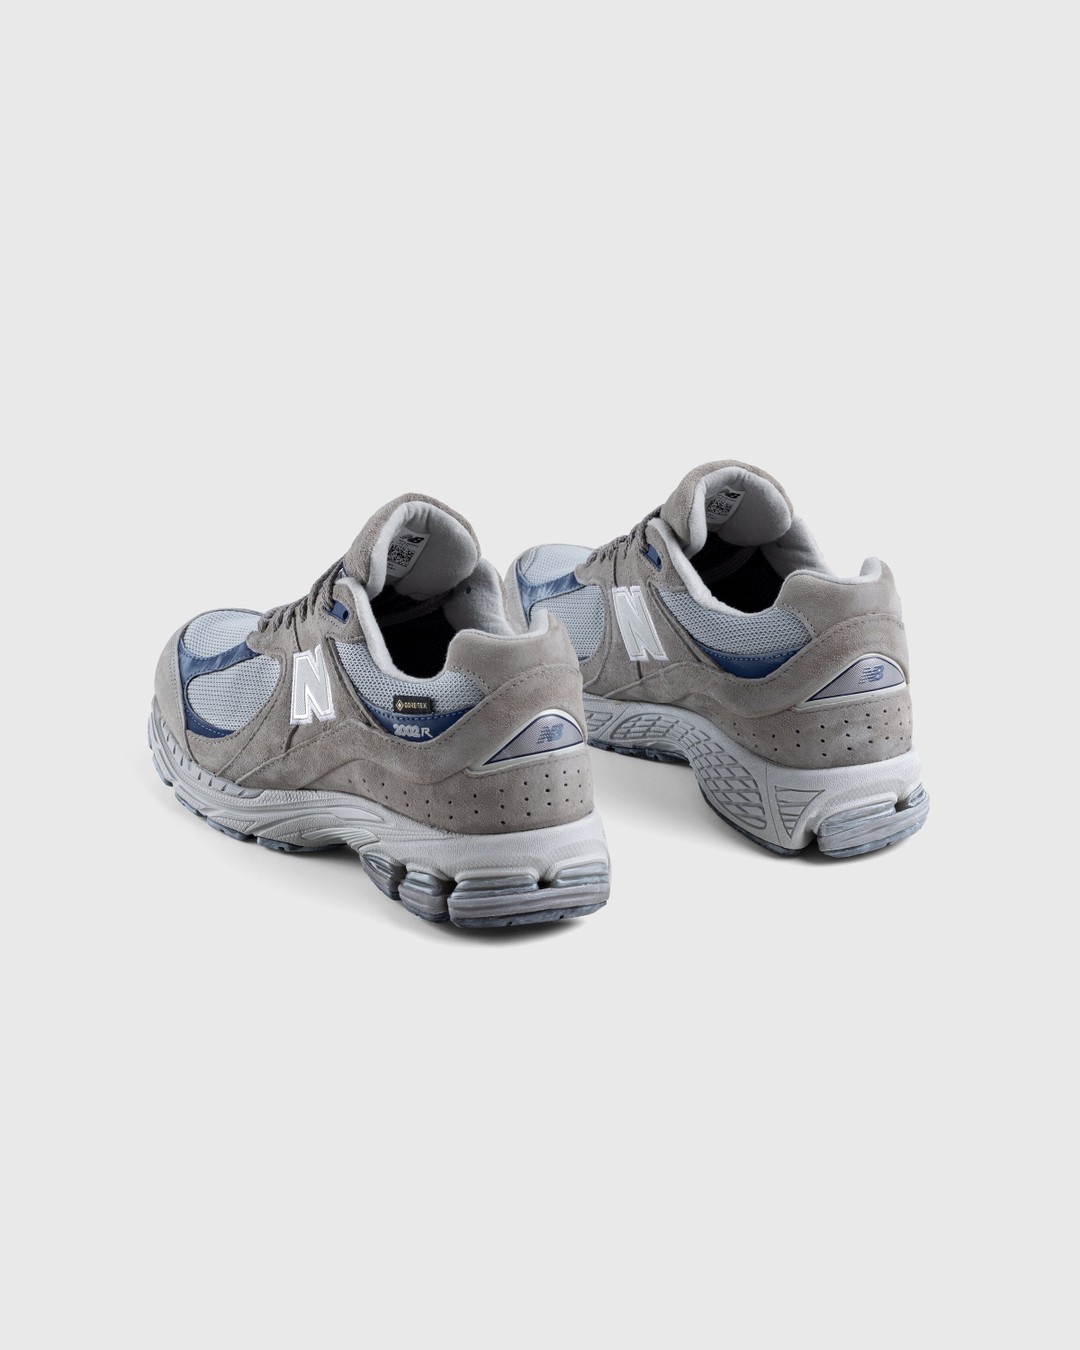 New Balance – M2002RXB Marblehead - Low Top Sneakers - Grey - Image 4